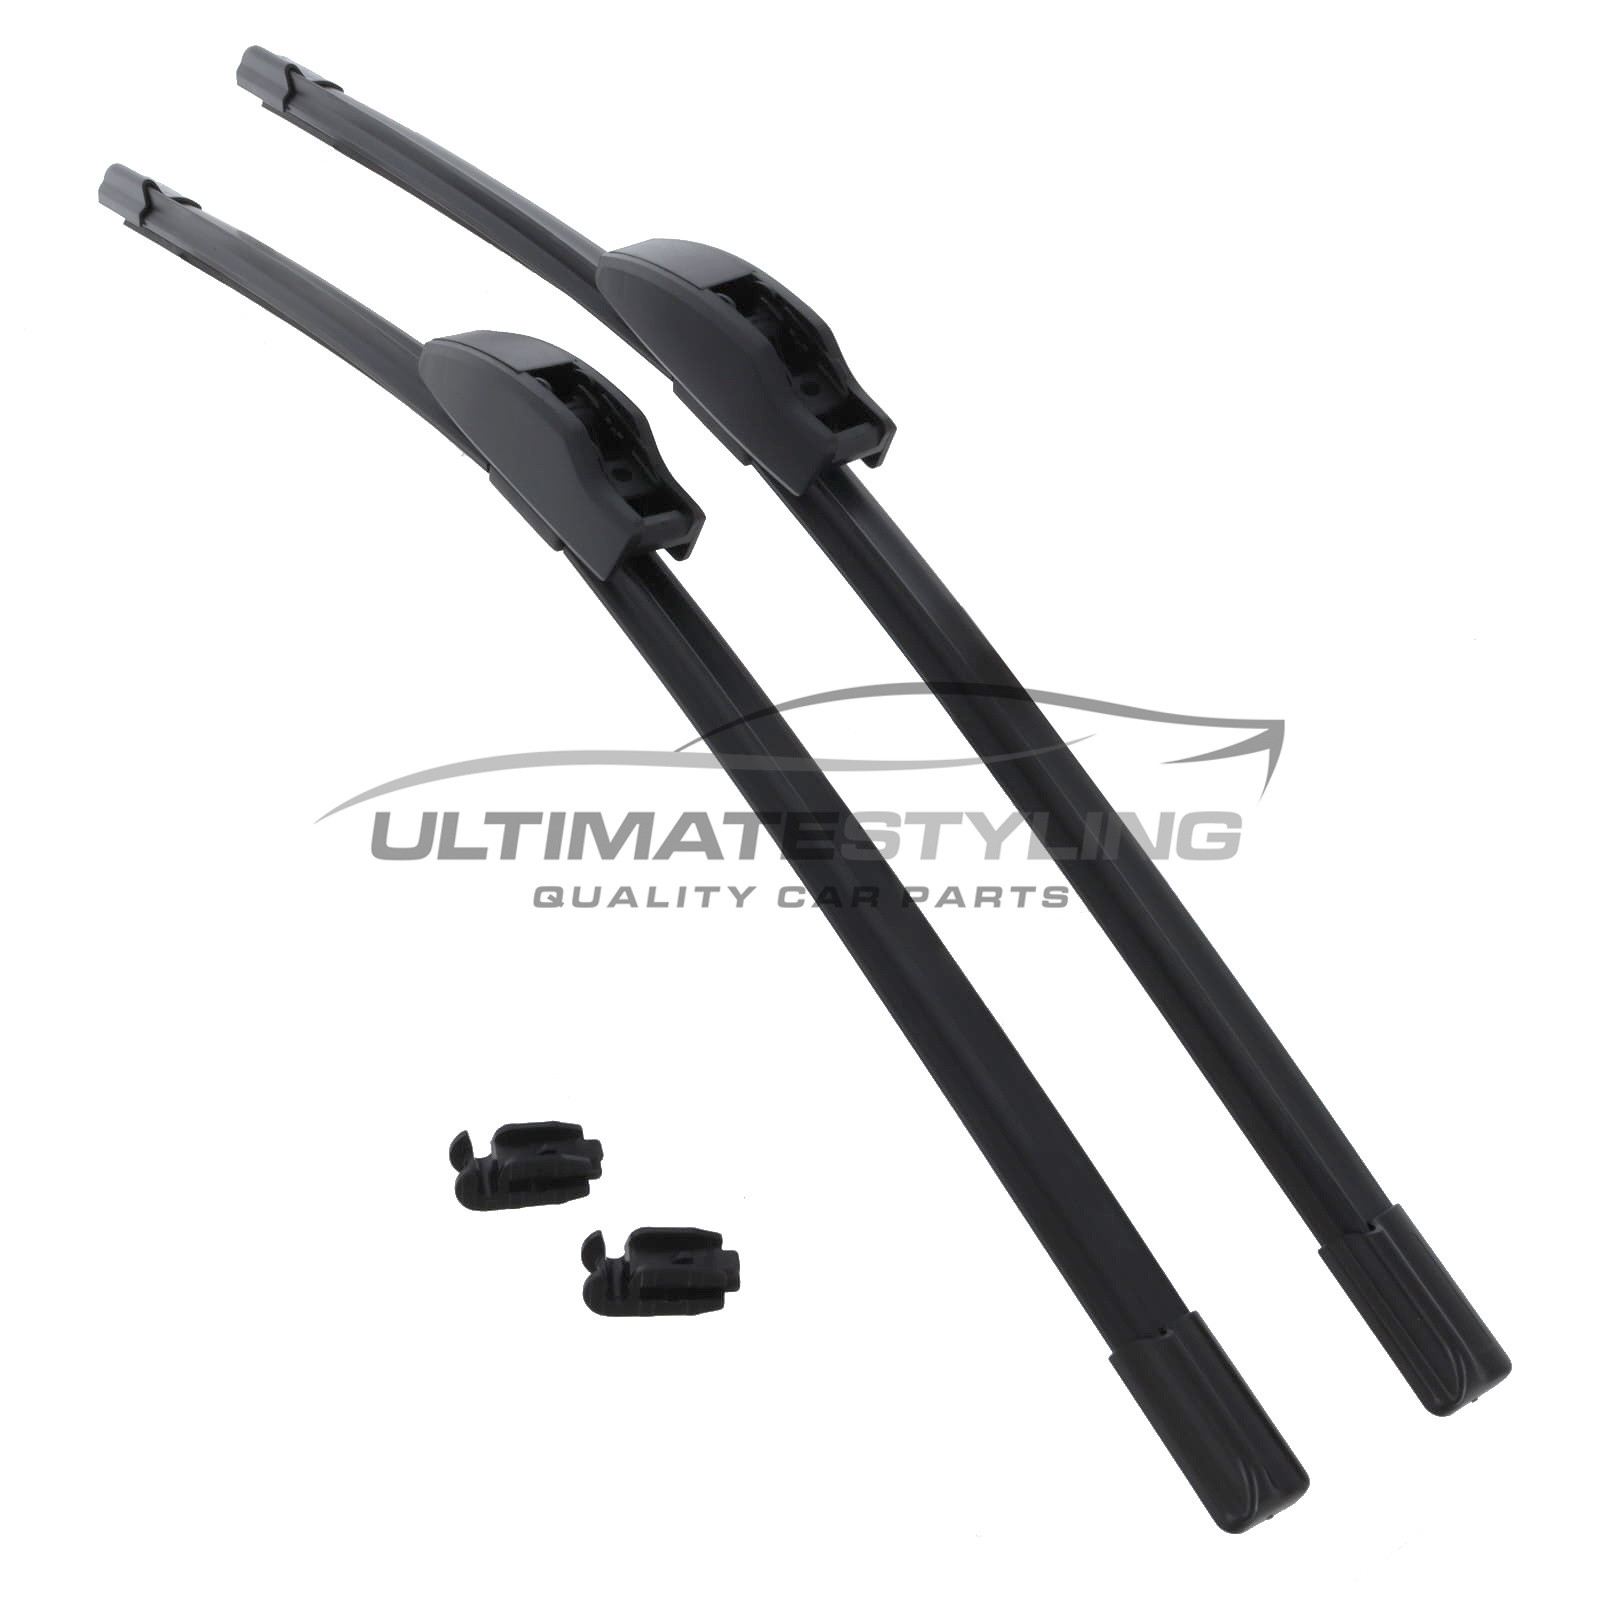 Drivers Side & Passenger Side (Front) Wiper Blades for Vauxhall Calibra